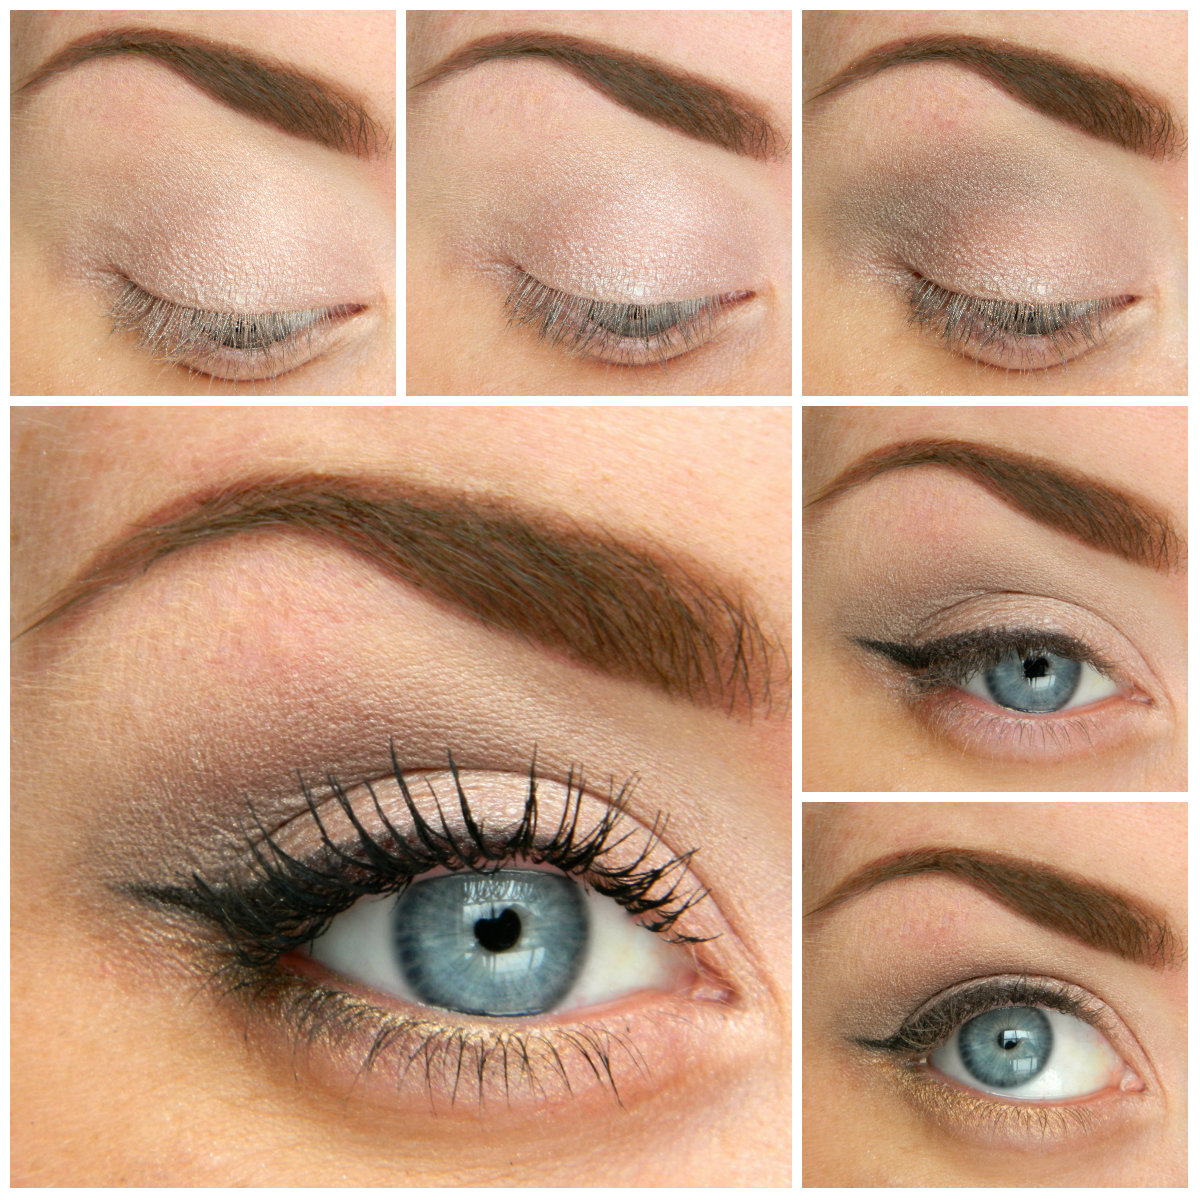 Prom Makeup Tutorial For Blue Eyes 5 Ways To Make Blue Eyes Pop With Proper Eye Makeup Her Style Code